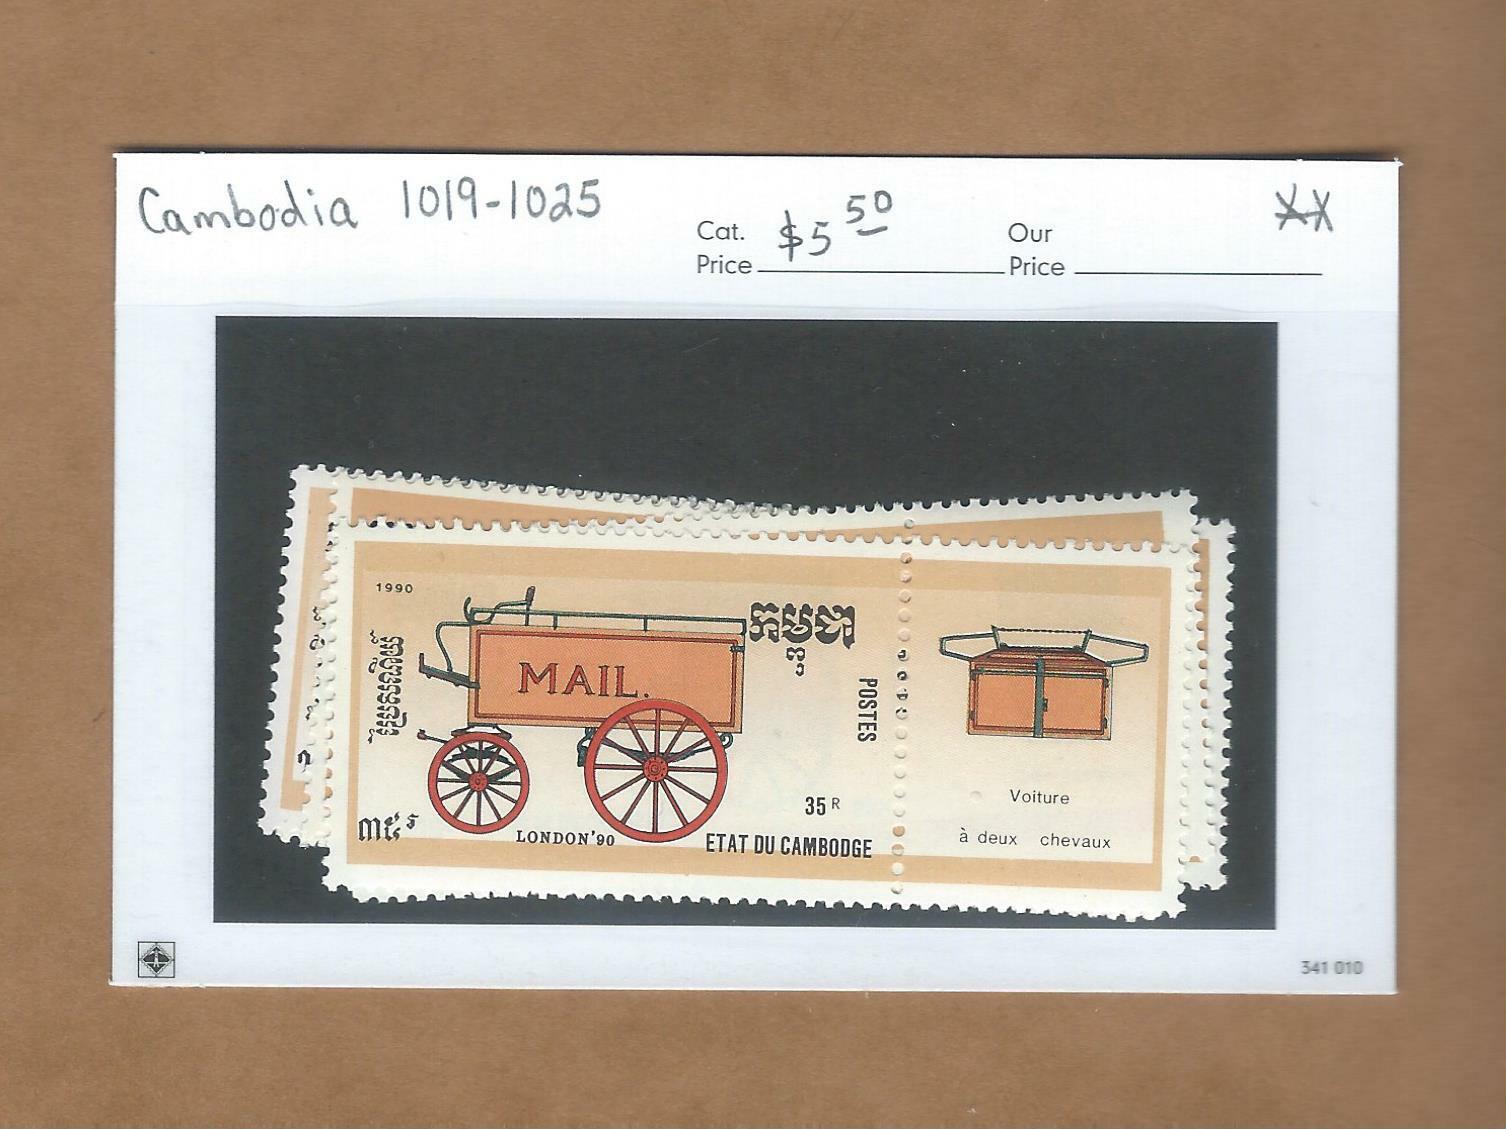 Cambodia Max safety 71% OFF Scott 1019-1025 MNH Mail Carriers